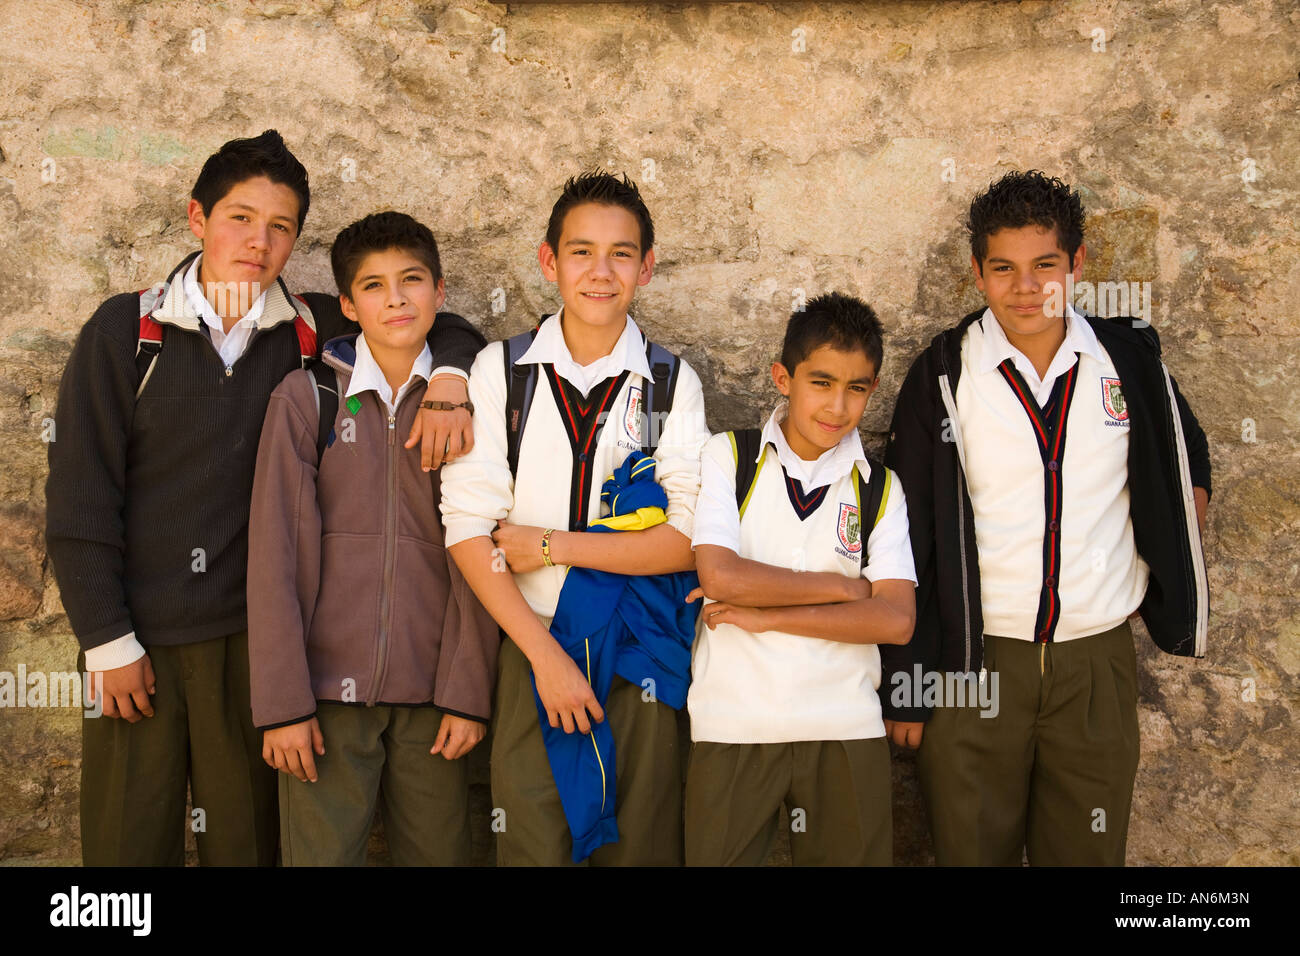 MEXICO Guanajuato Five Mexican boys in school uniforms pose in front of stone wall friends together Stock Photo